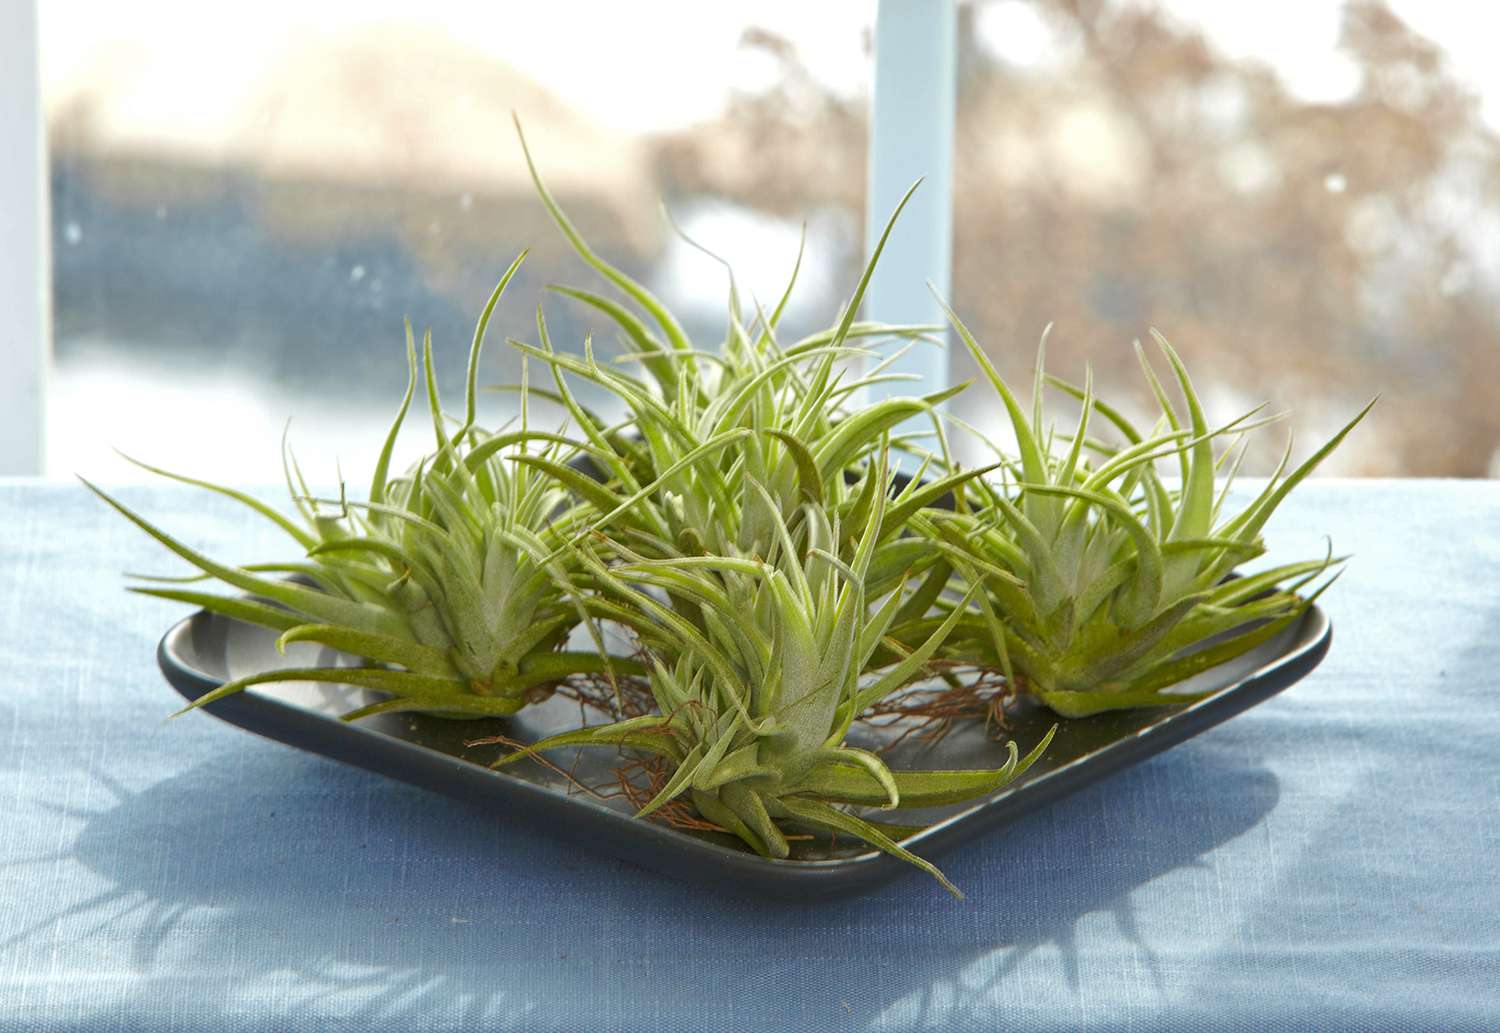 How to Grow and Care for Air Plants   Better Homes & Gardens